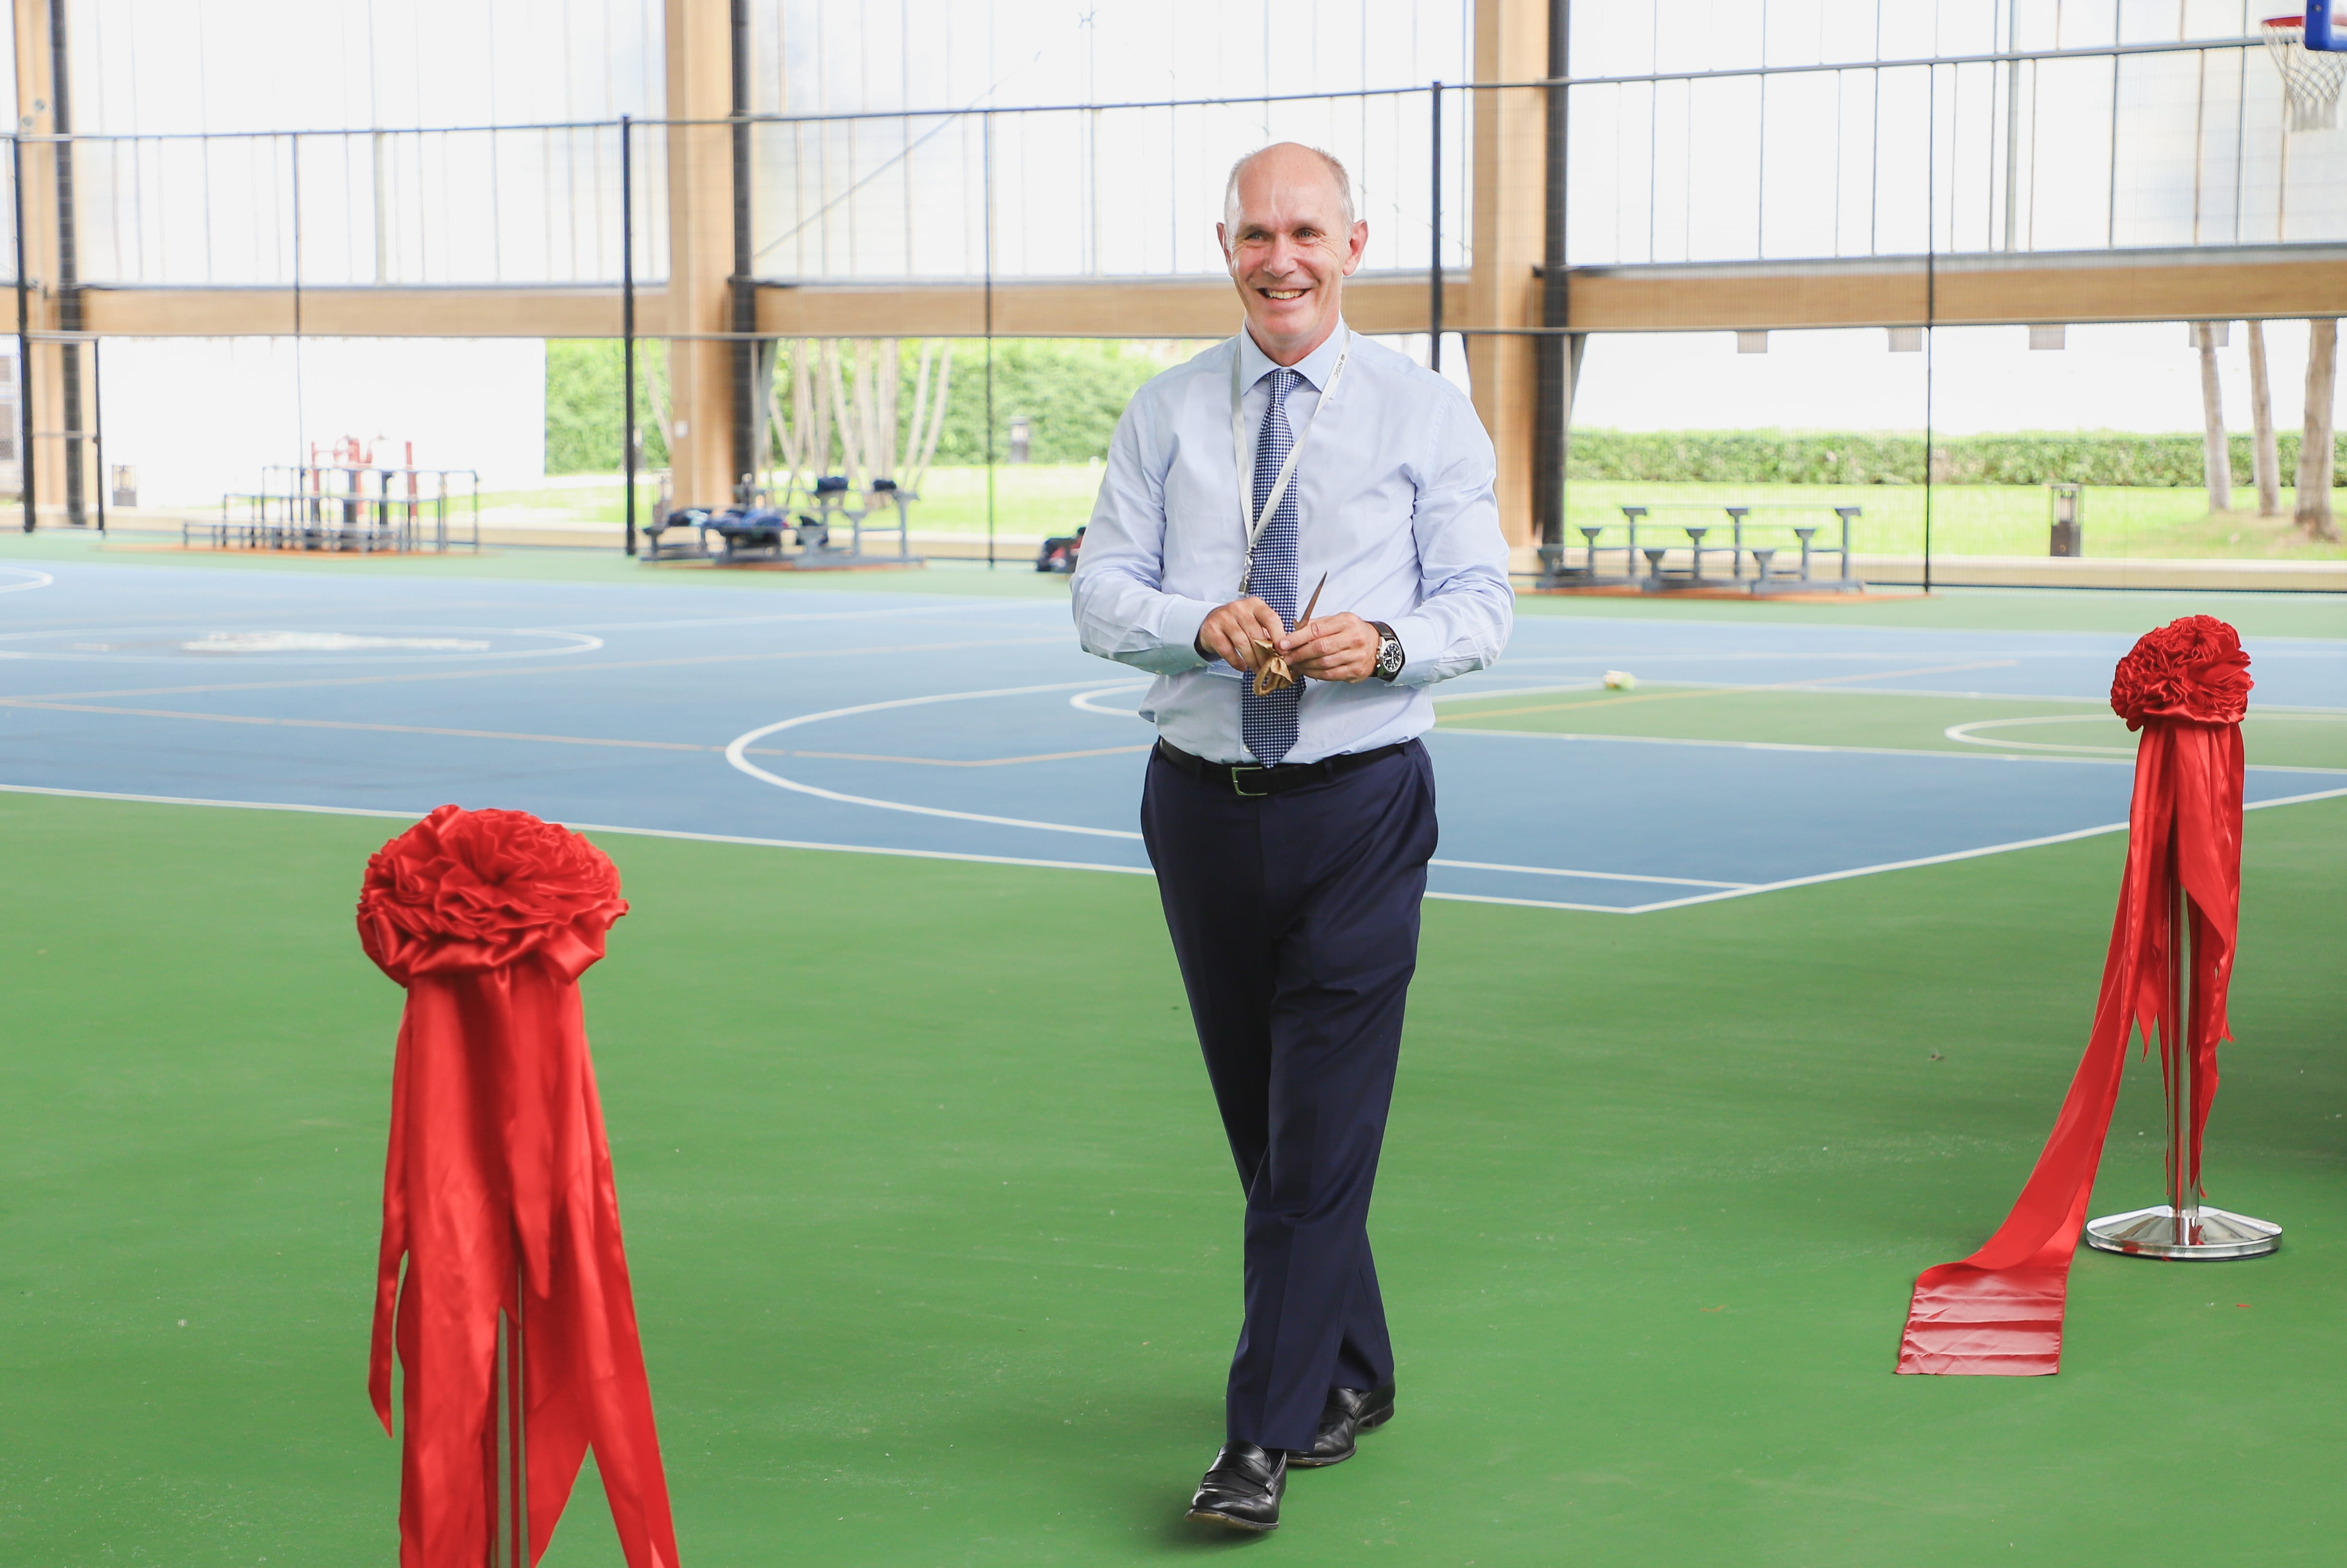 New Northbridge Sports Hall opened by Nord Anglia CEO - new-northbridge-sports-hall-opened-by-nord-anglia-ceo